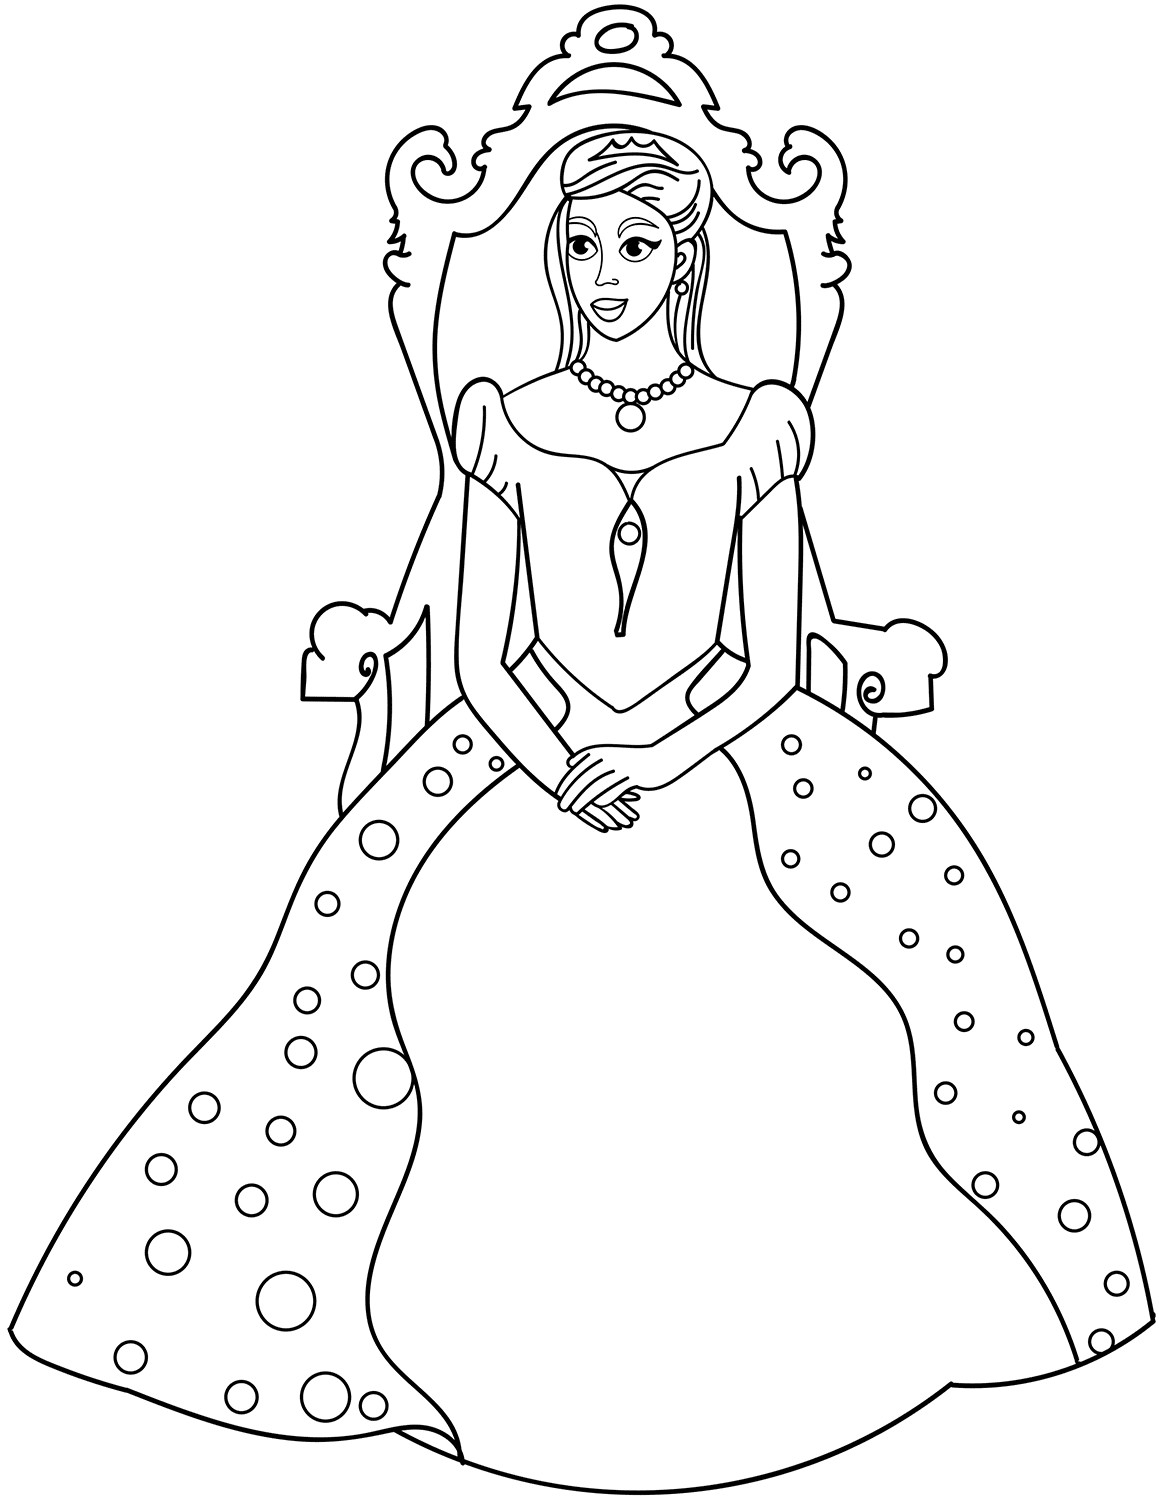 Princess Sitting On Throne Coloring Page